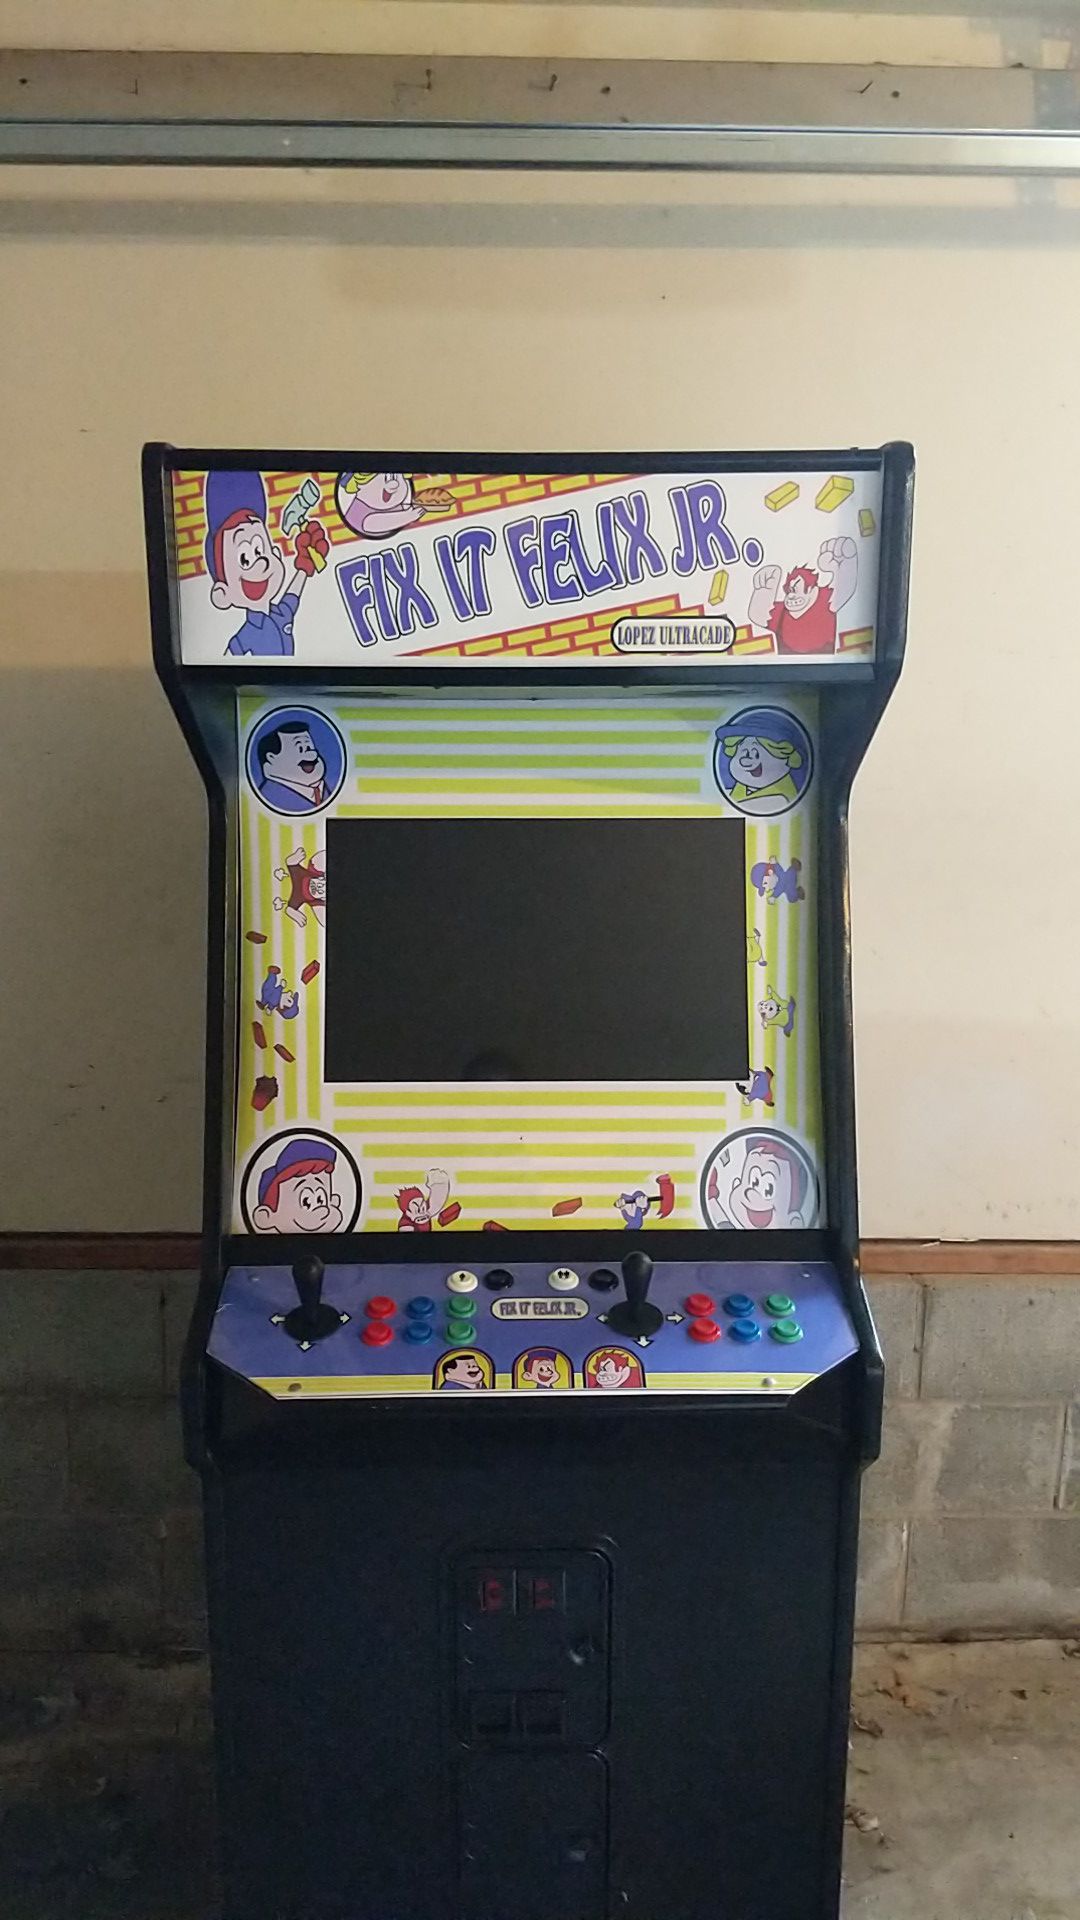 Ultracade Stand Up Arcade Cabinet w/ over 1000 Games 2 Players